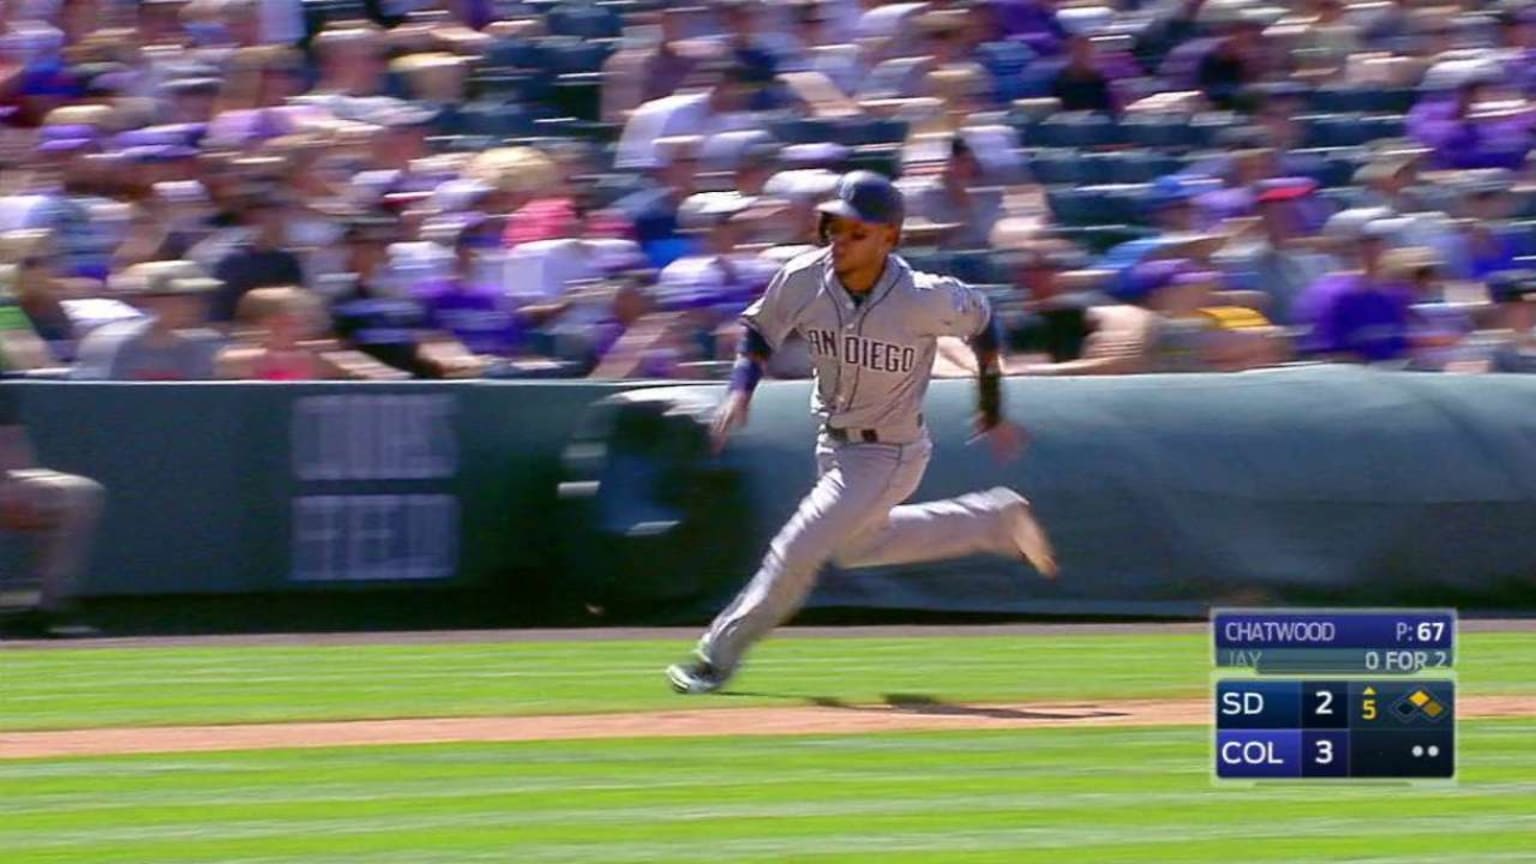 Jon Jay's game-winning run against the Pirates on Tuesday: Shades